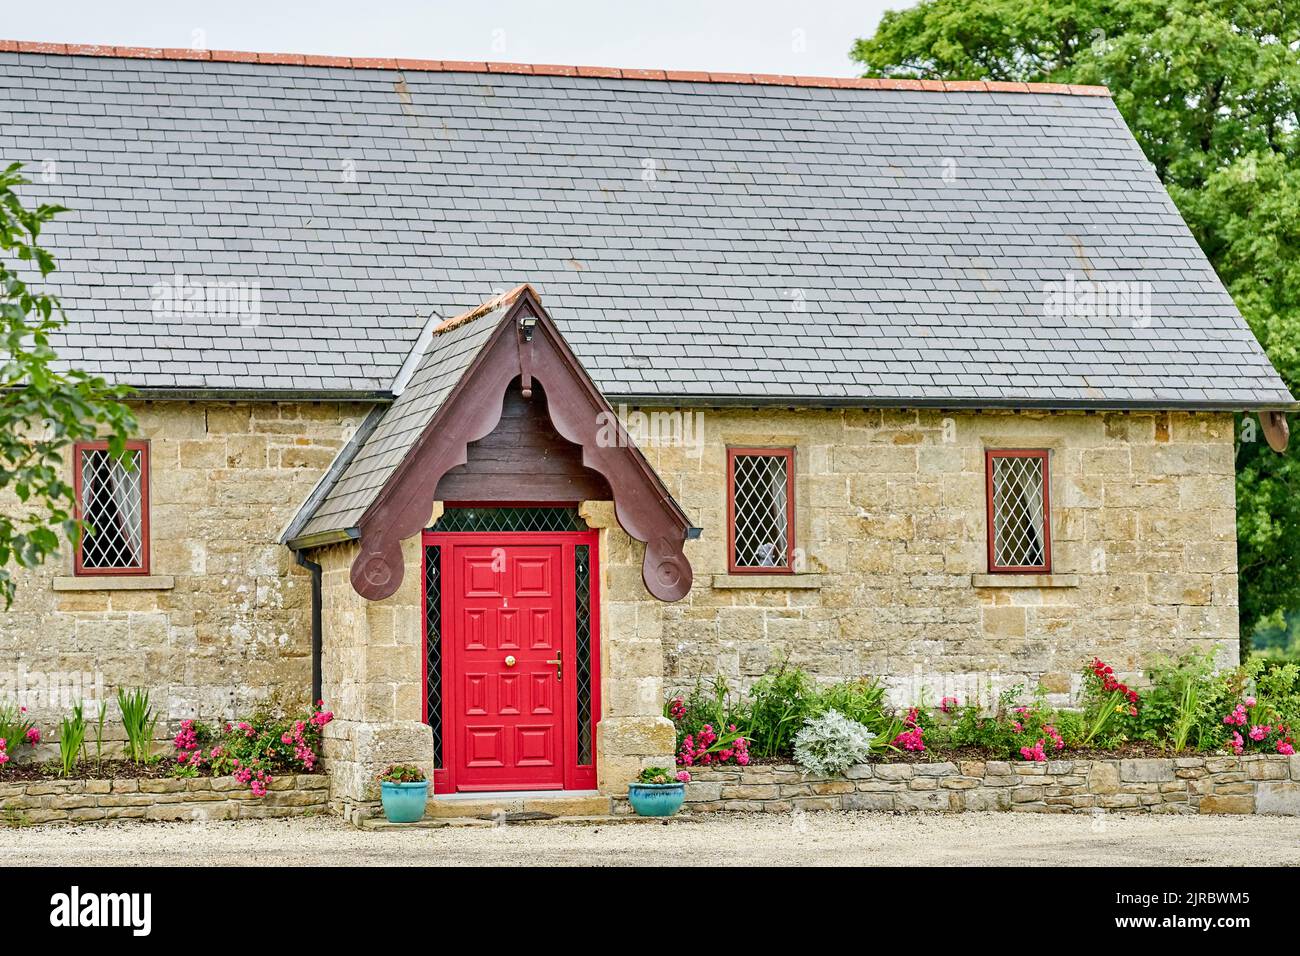 A beautiful stone house with a red door and flower garden, in Ireland. Stock Photo